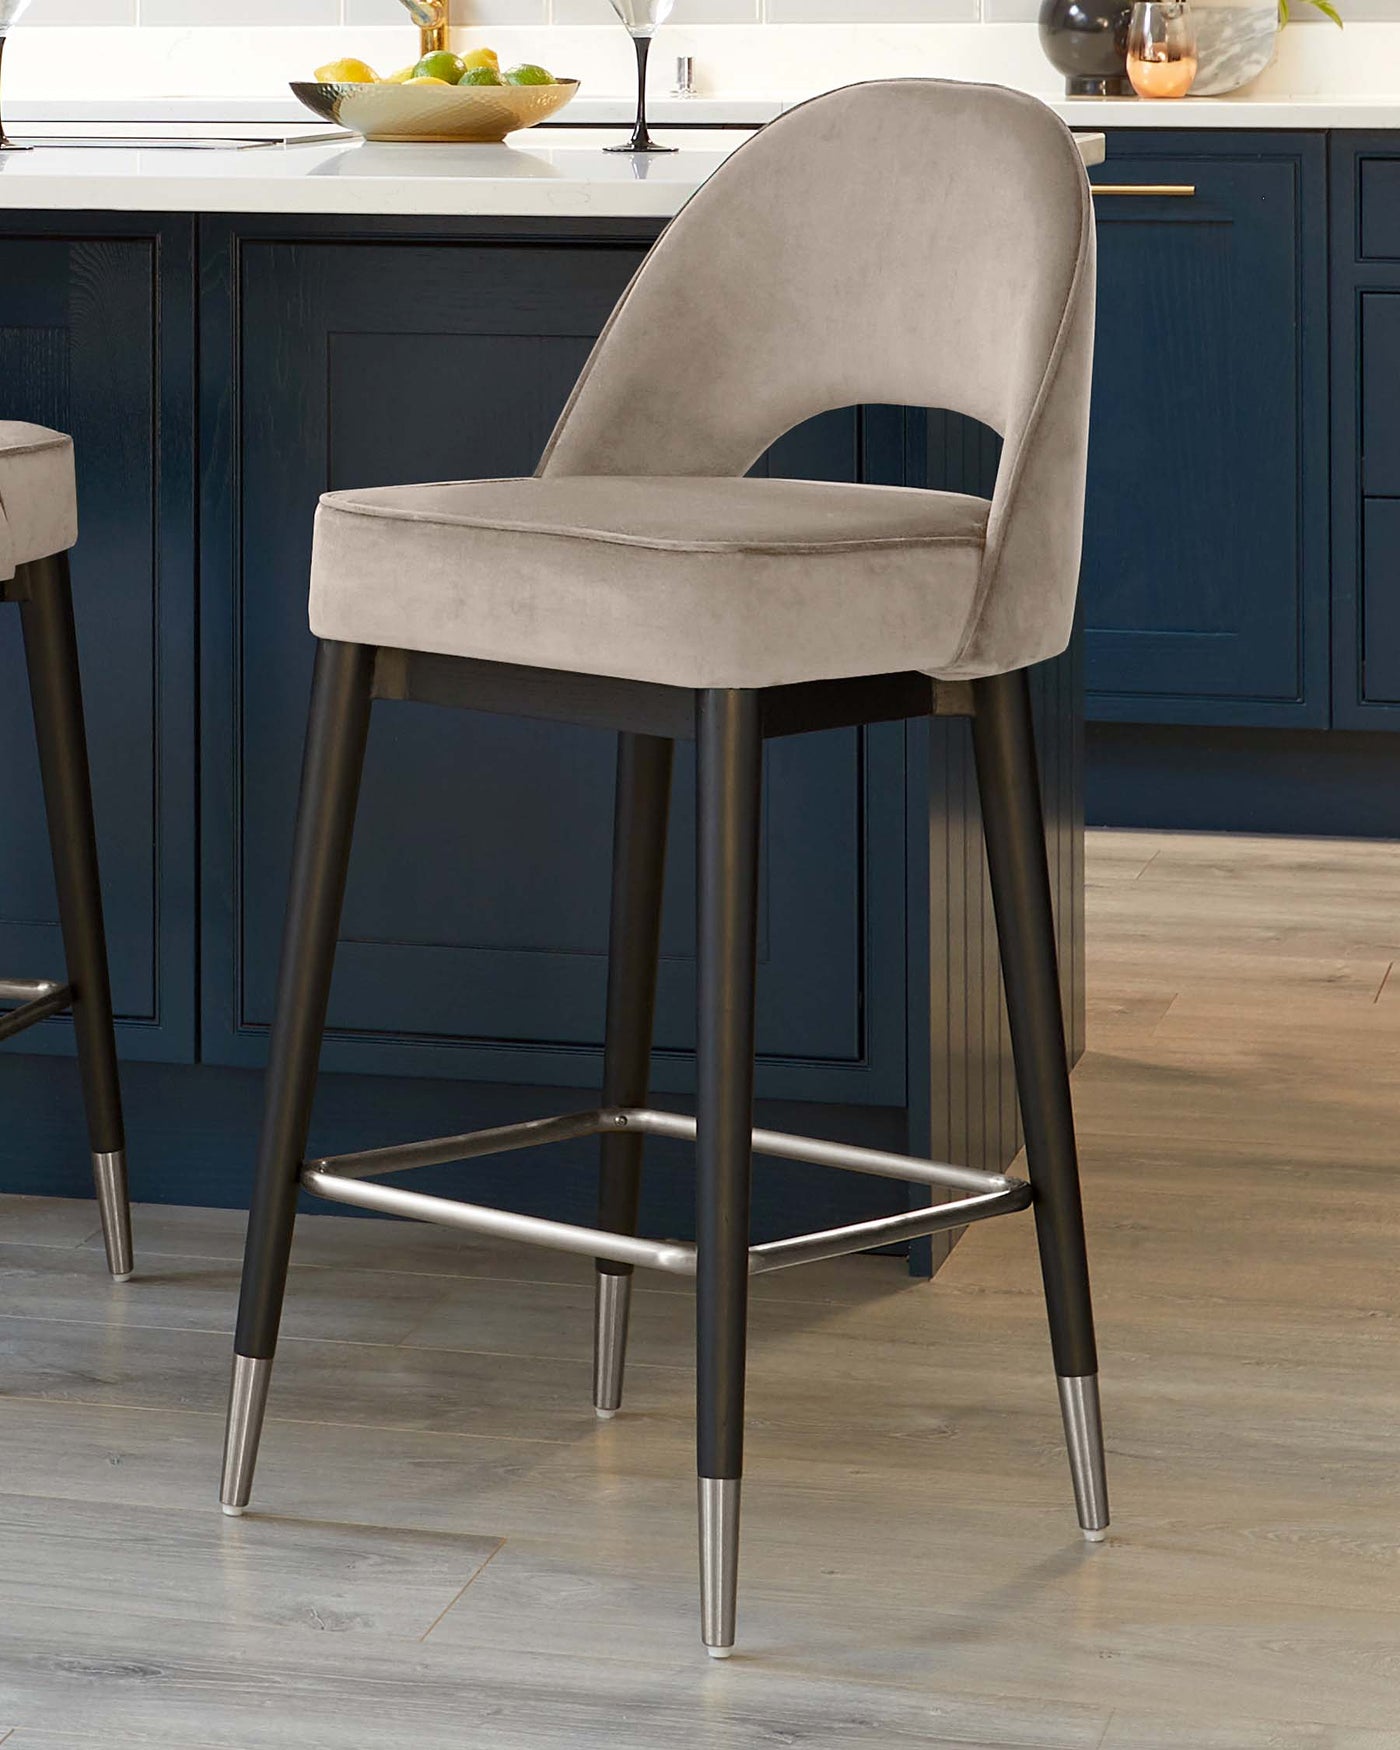 Elegant modern barstool with velvety taupe upholstery and a curved seat back, featuring black tapered legs with metallic footrest and tips.